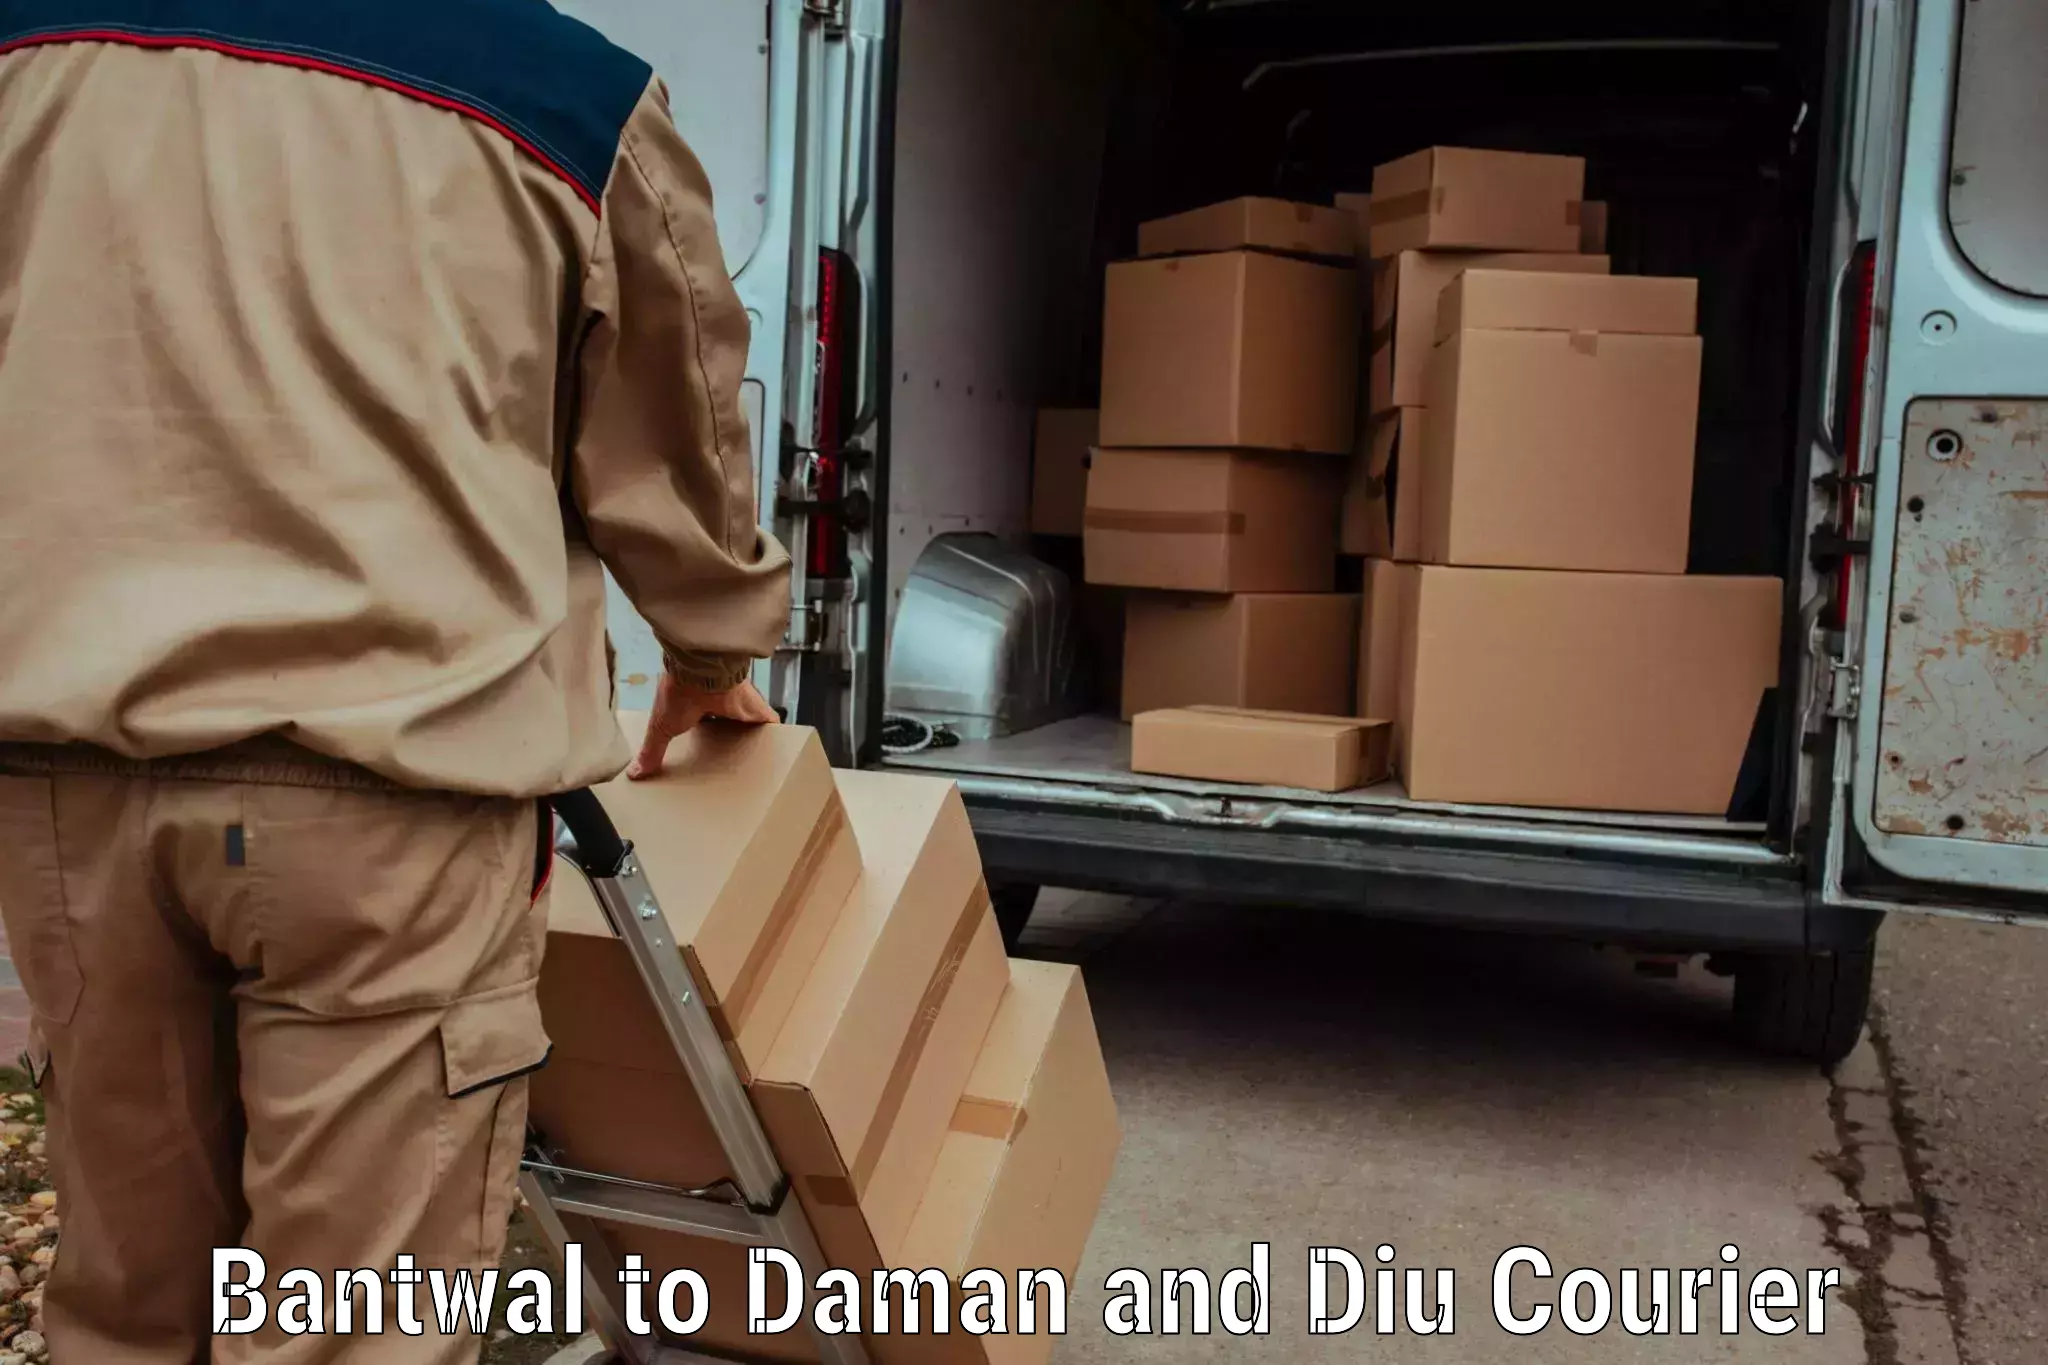 Luggage transport consultancy Bantwal to Daman and Diu